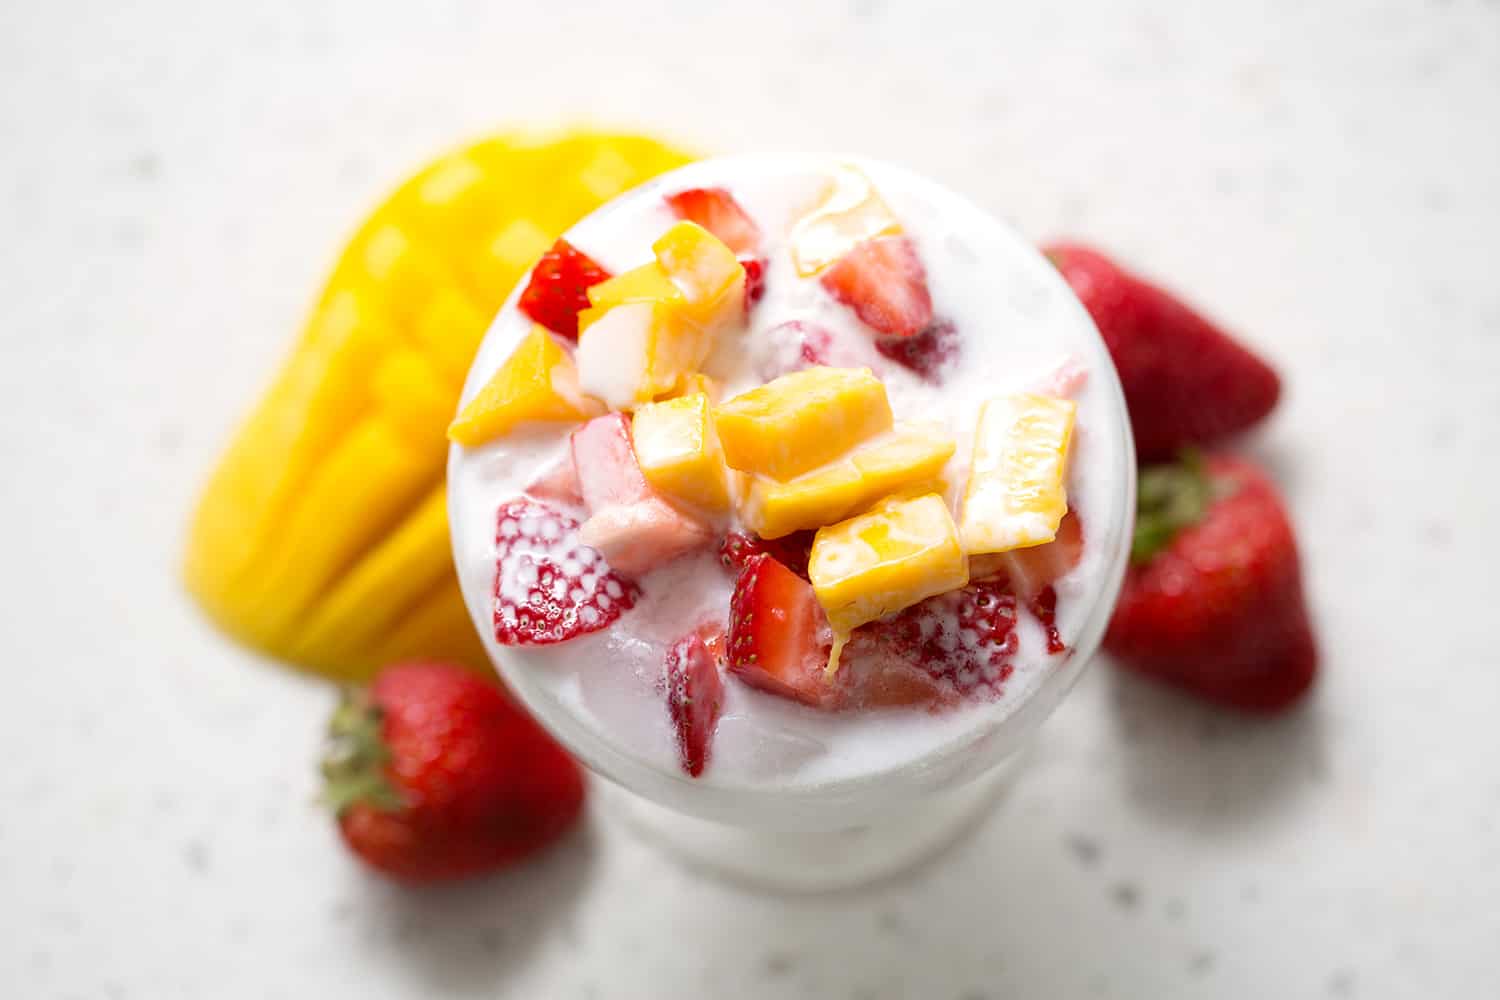 AIP Paleo shaved ice with mango, coconut milk, strawberries on white background.